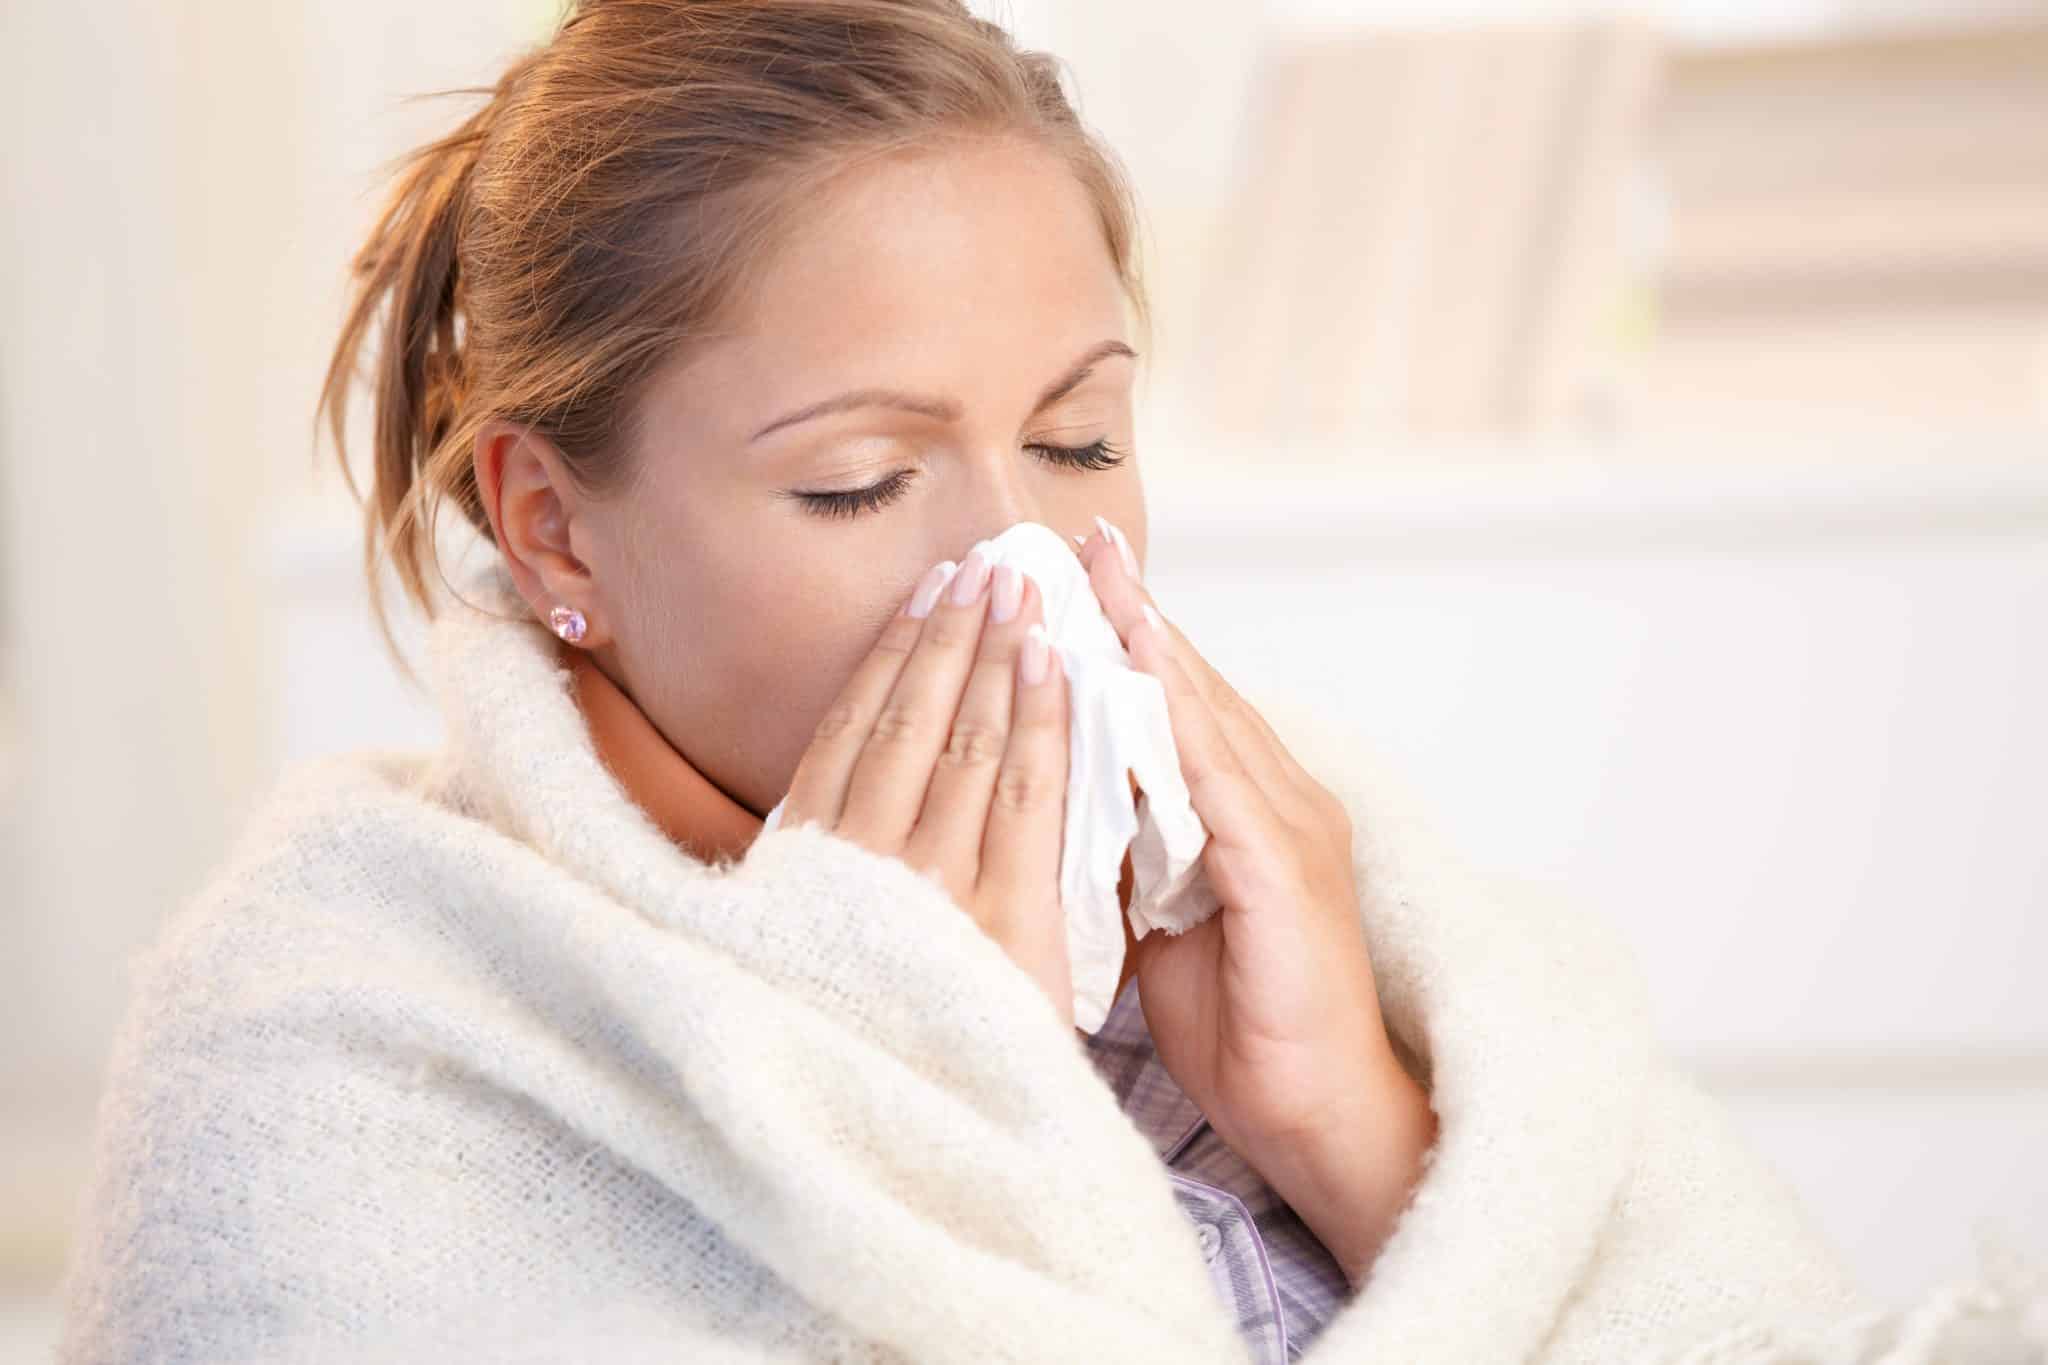 Use these holistic approaches to treat a cold or flu naturally.